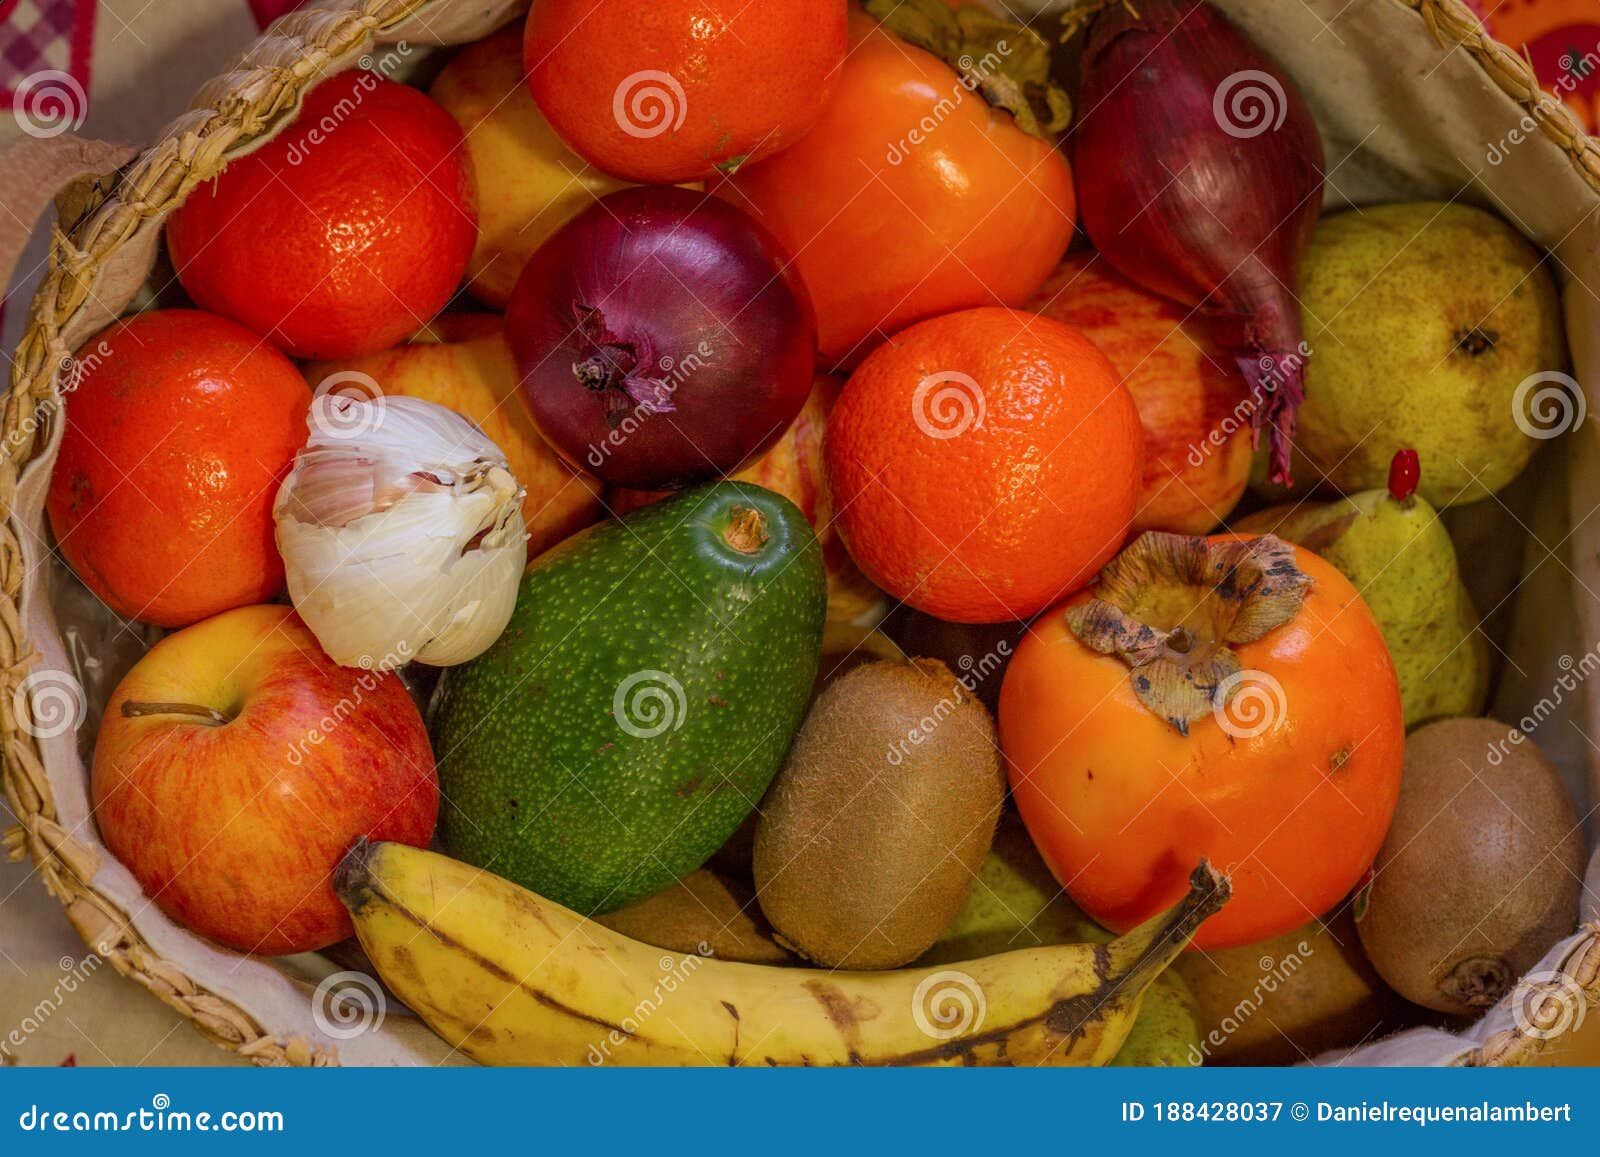 close up view of basquet full of fruits and a head of garlic.